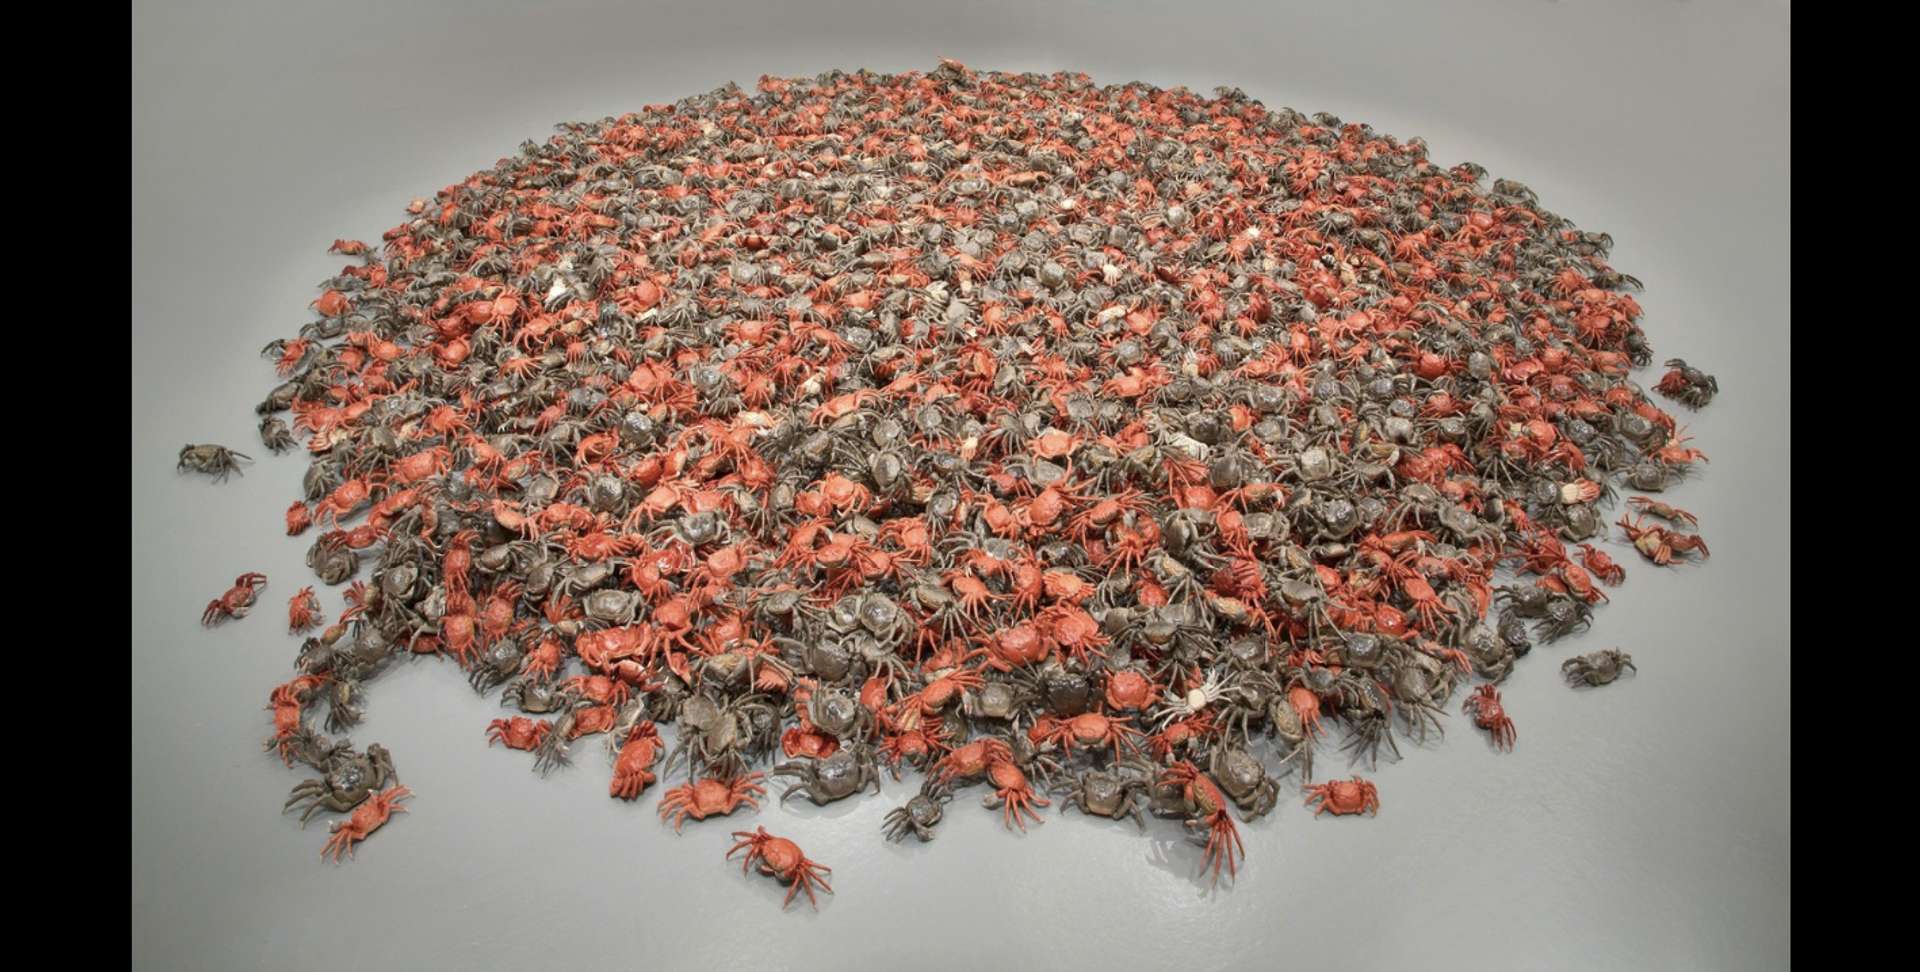 A photograph showing a pile of porcelain red and crown crabs stacked in the center of an empty gallery floor.